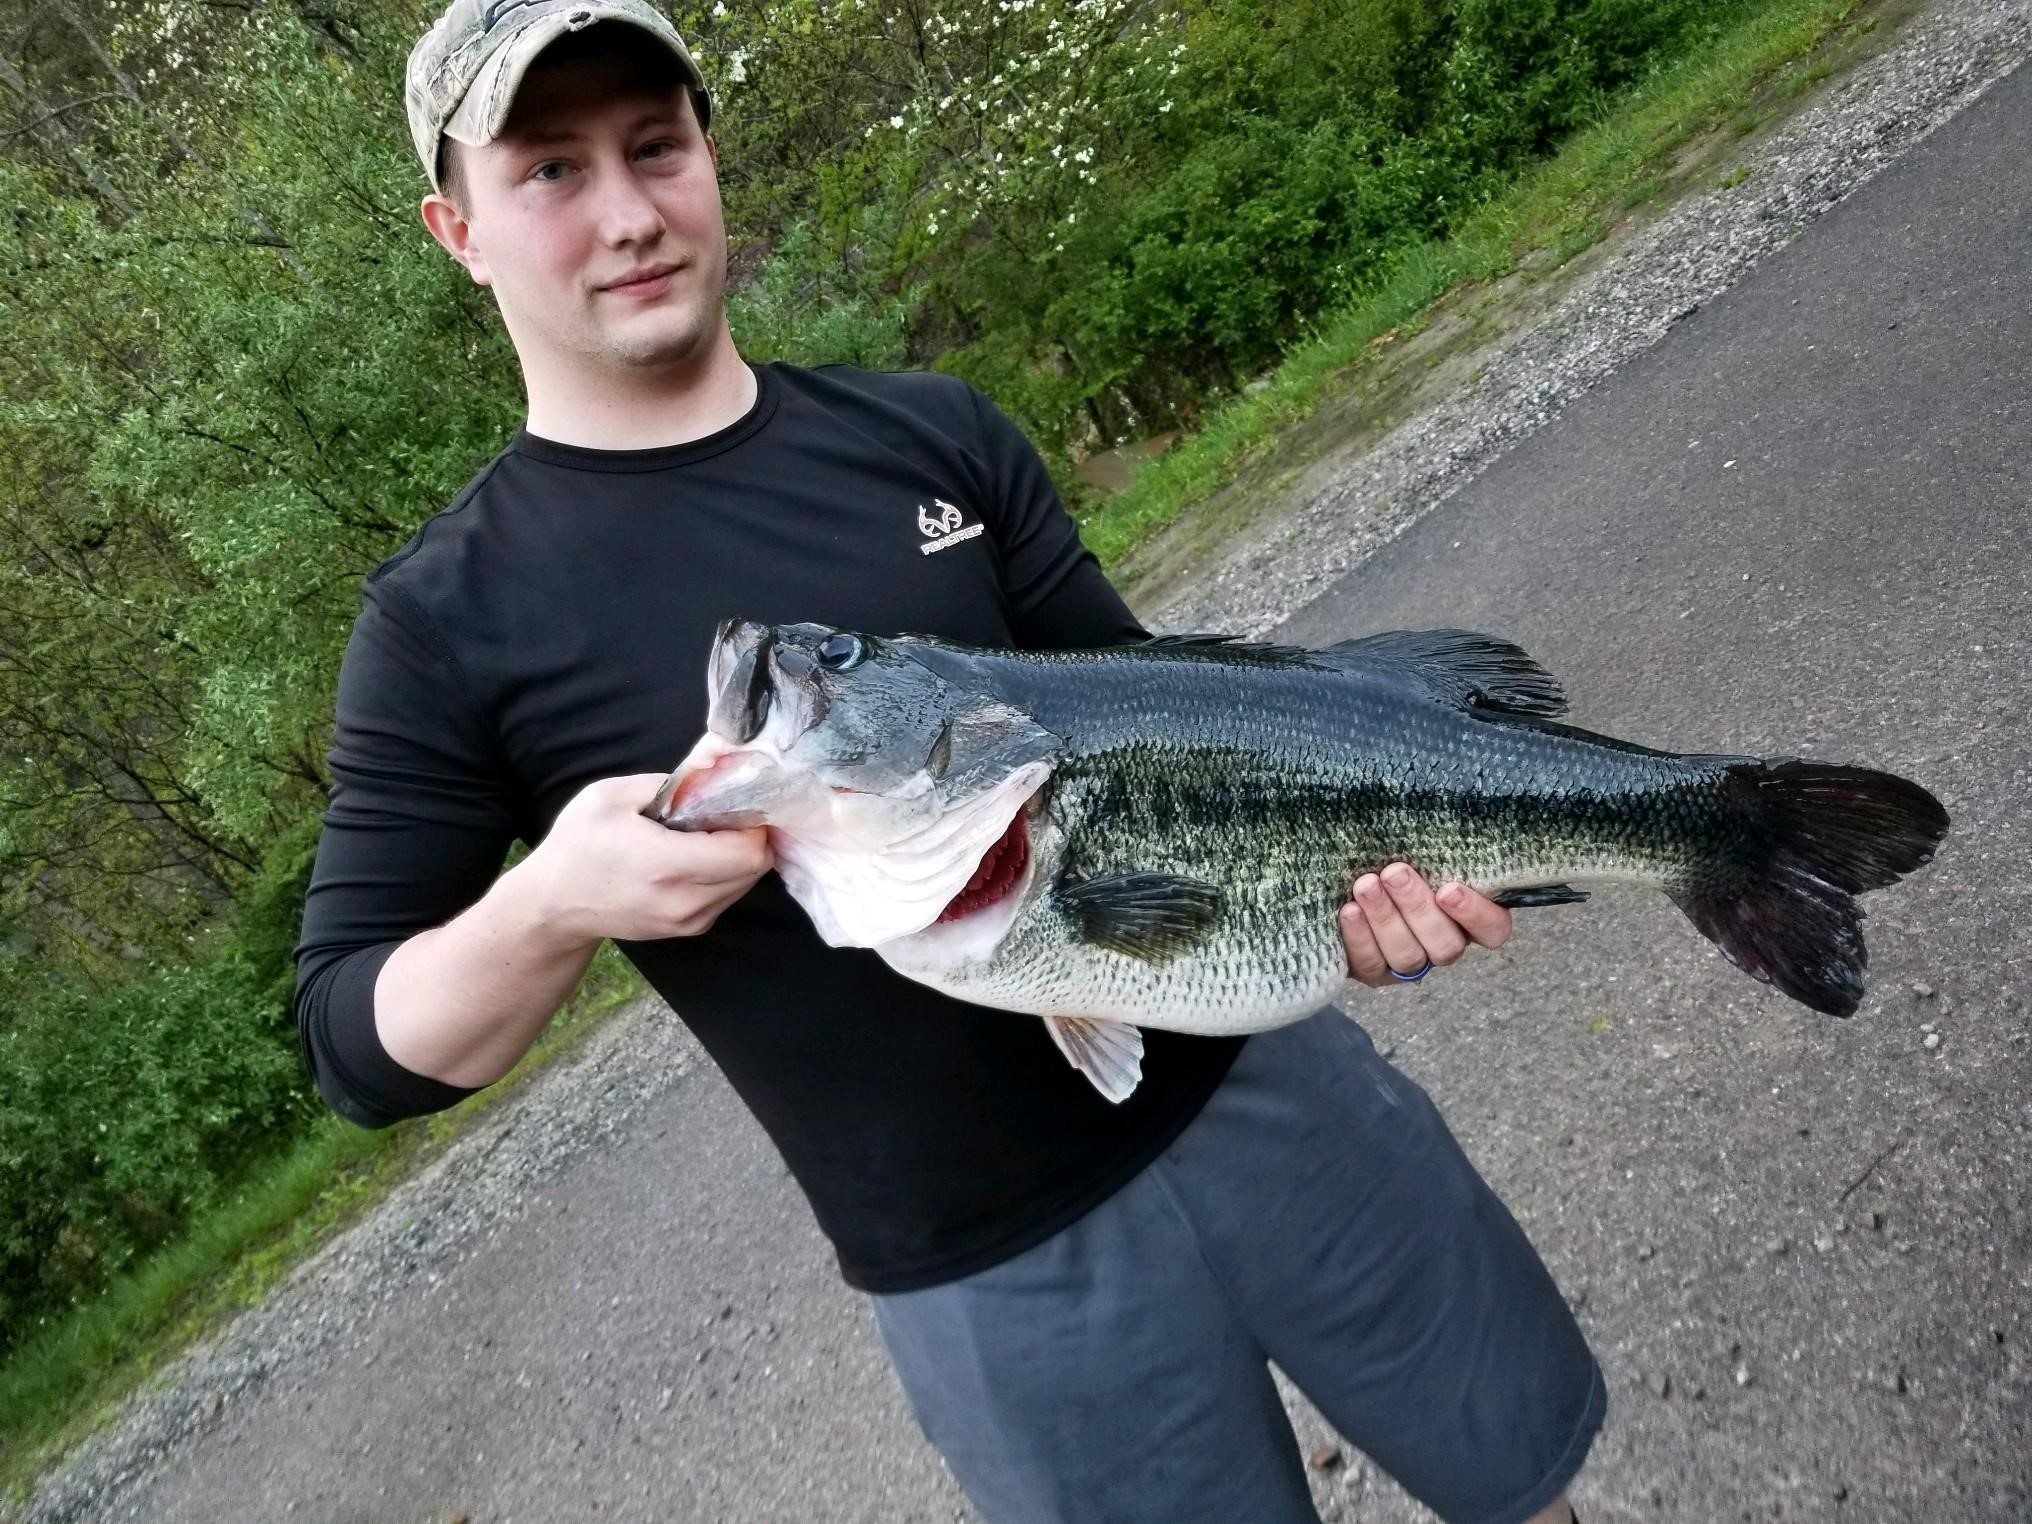 A young man is holding up a largemouth bass